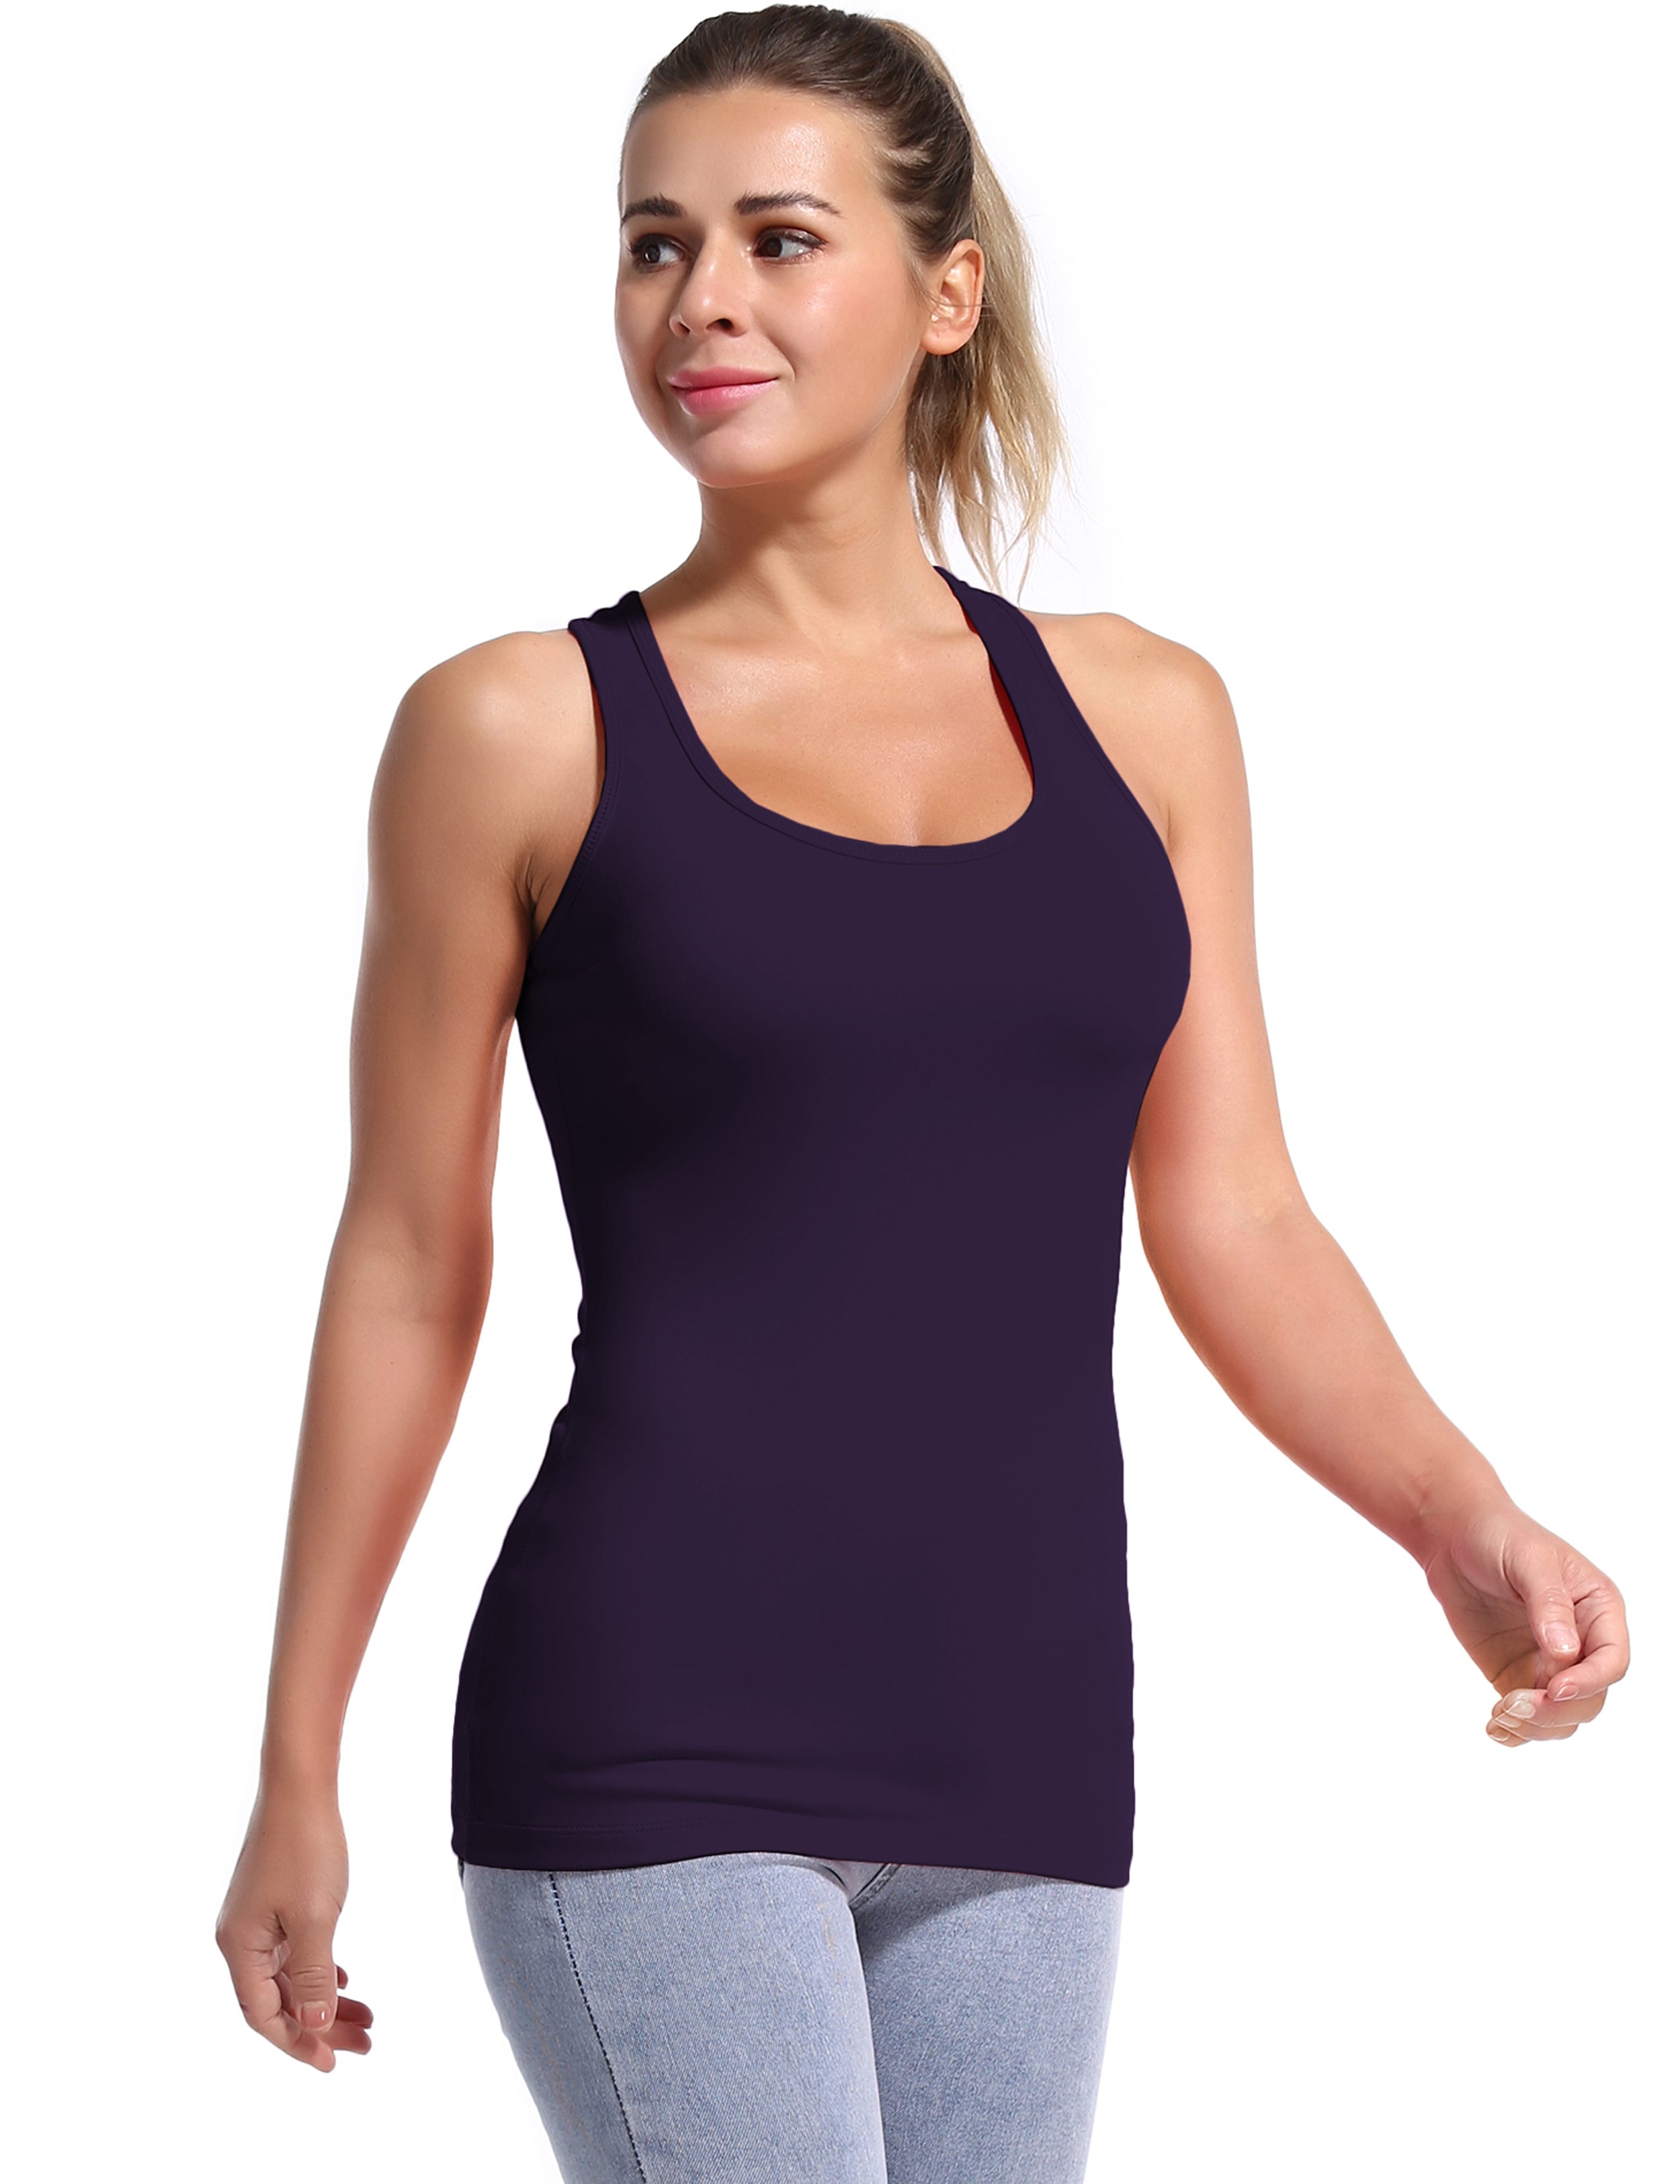 Racerback Athletic Tank Tops midnightblue 92%Nylon/8%Spandex(Cotton Soft) Designed for Jogging Tight Fit So buttery soft, it feels weightless Sweat-wicking Four-way stretch Breathable Contours your body Sits below the waistband for moderate, everyday coverage